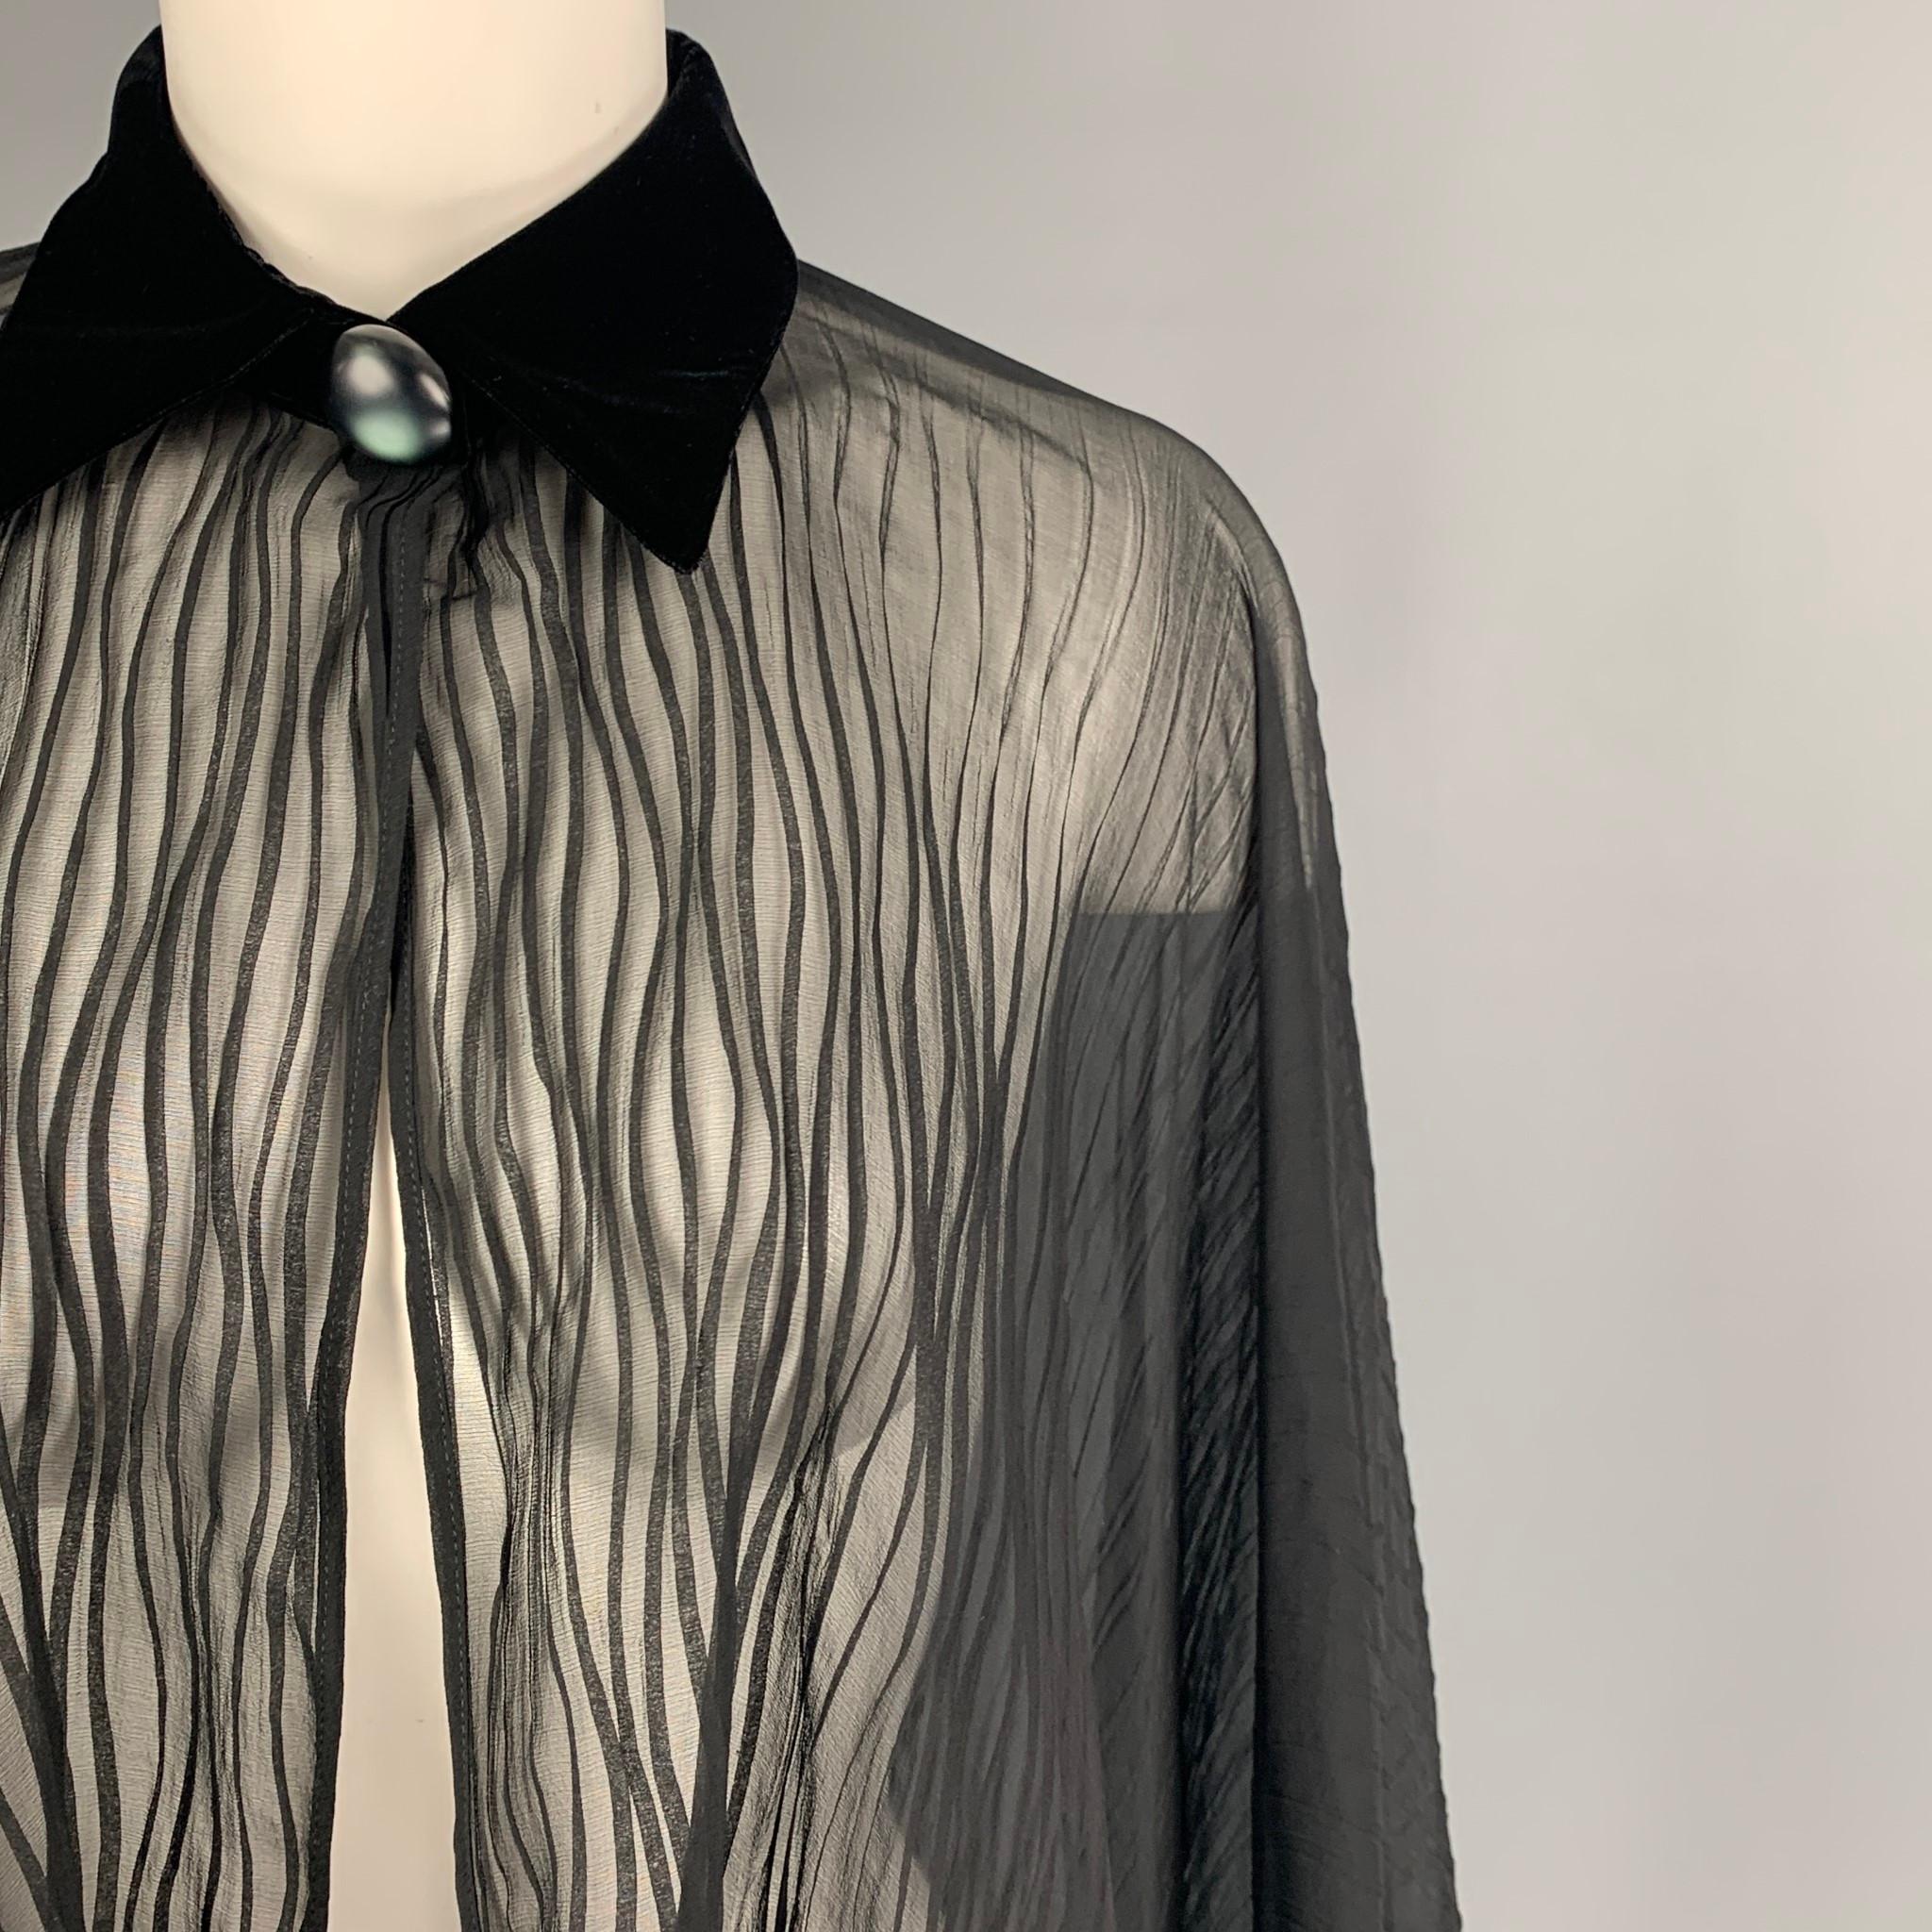 GIORGIO ARMANI scarf comes in a black see through textured silk featuring a velvet collar and a single button detail. Made in Italy.

Excellent Pre-Owned Condition.
Marked: One Size
Original Retail Price: $2,795.00

Measurements:

Min - Max Length: